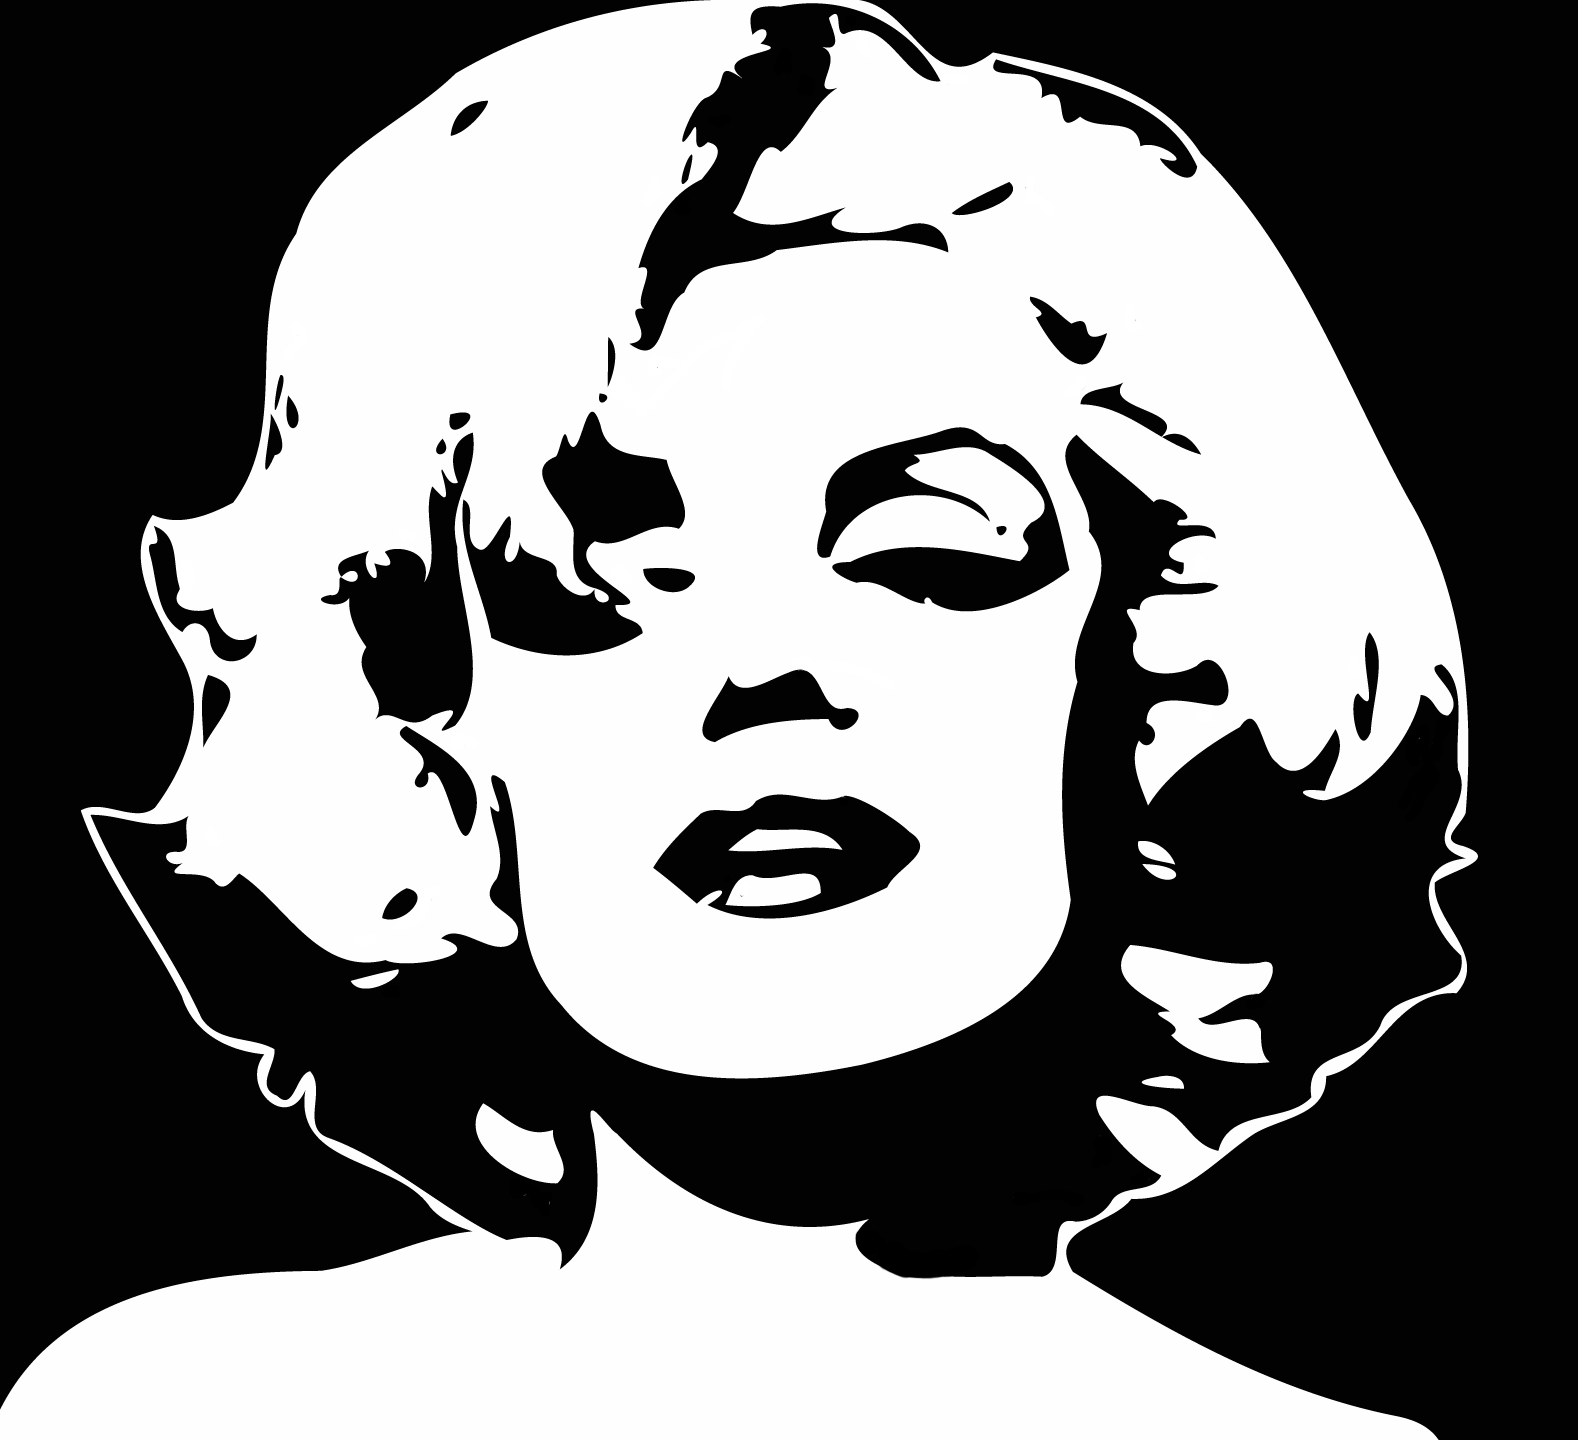 O Marilyn Monroe Norma Jean Some Like It Hot Sex Symbol Pop And Cultural Icon American 